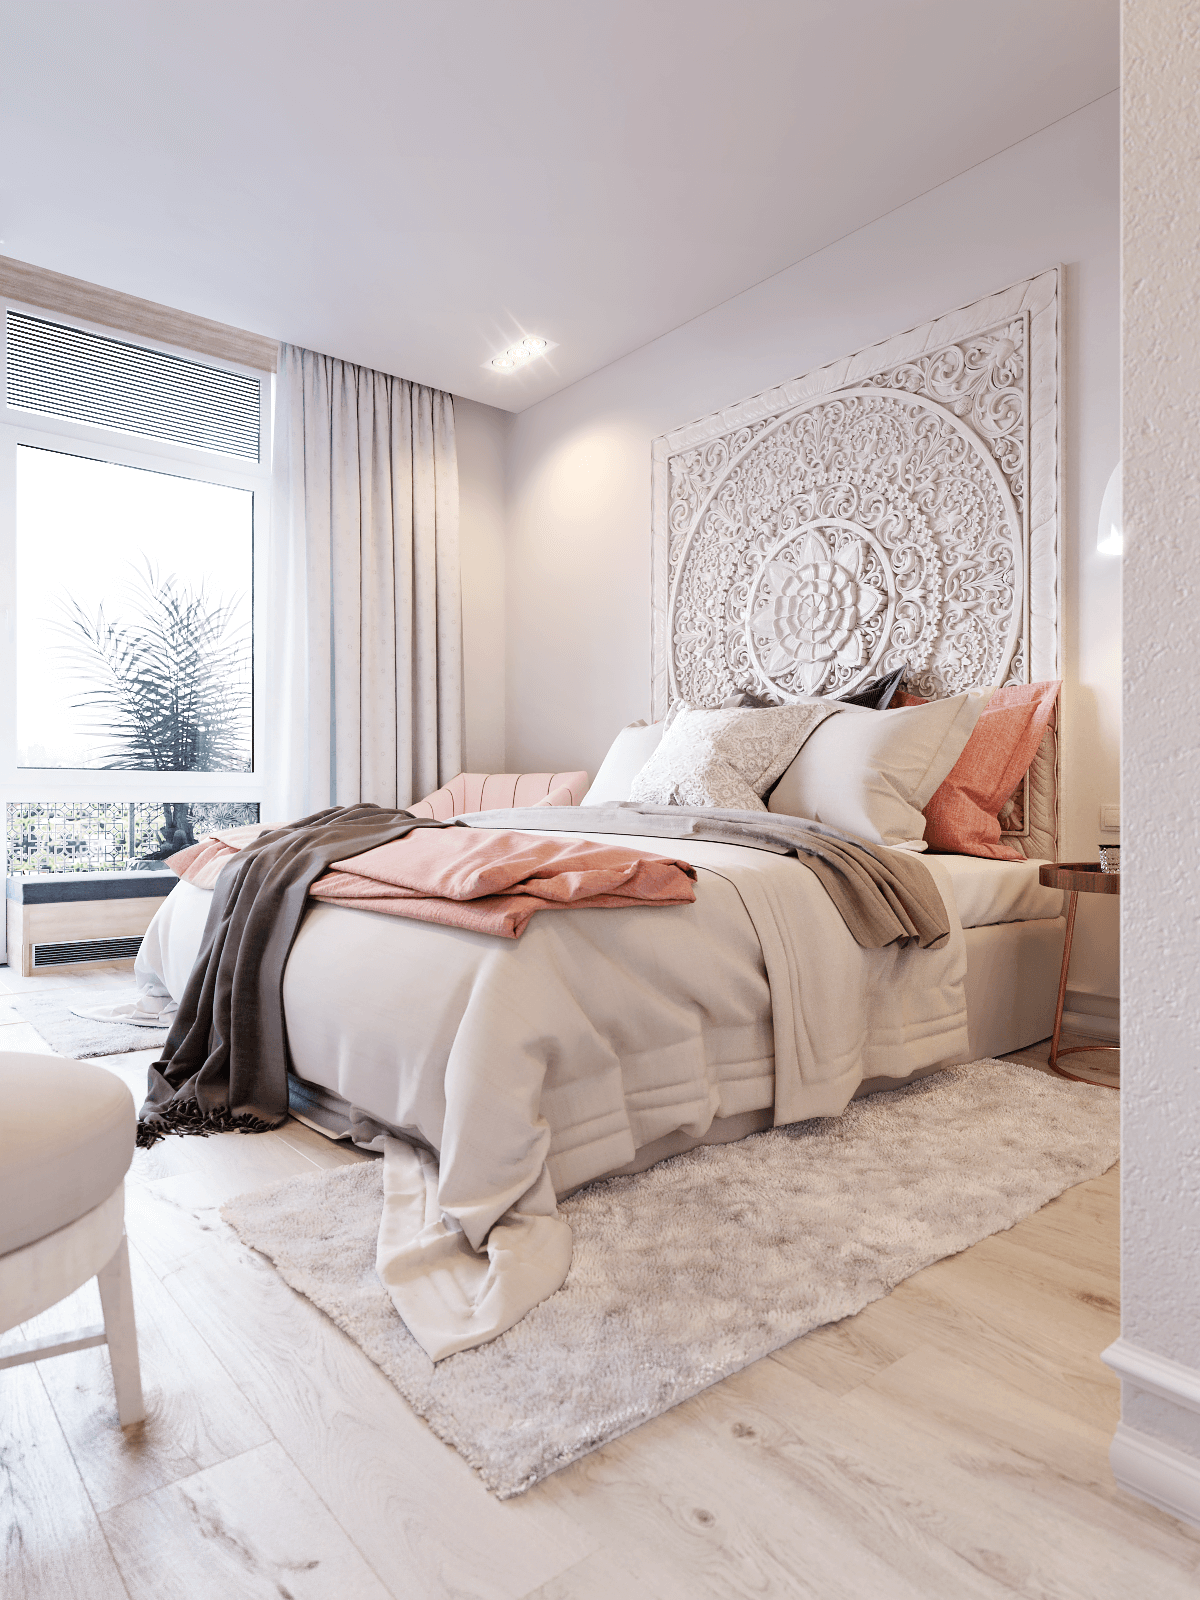 25+ Best Bedroom Wall Decor Ideas and Designs for 2021